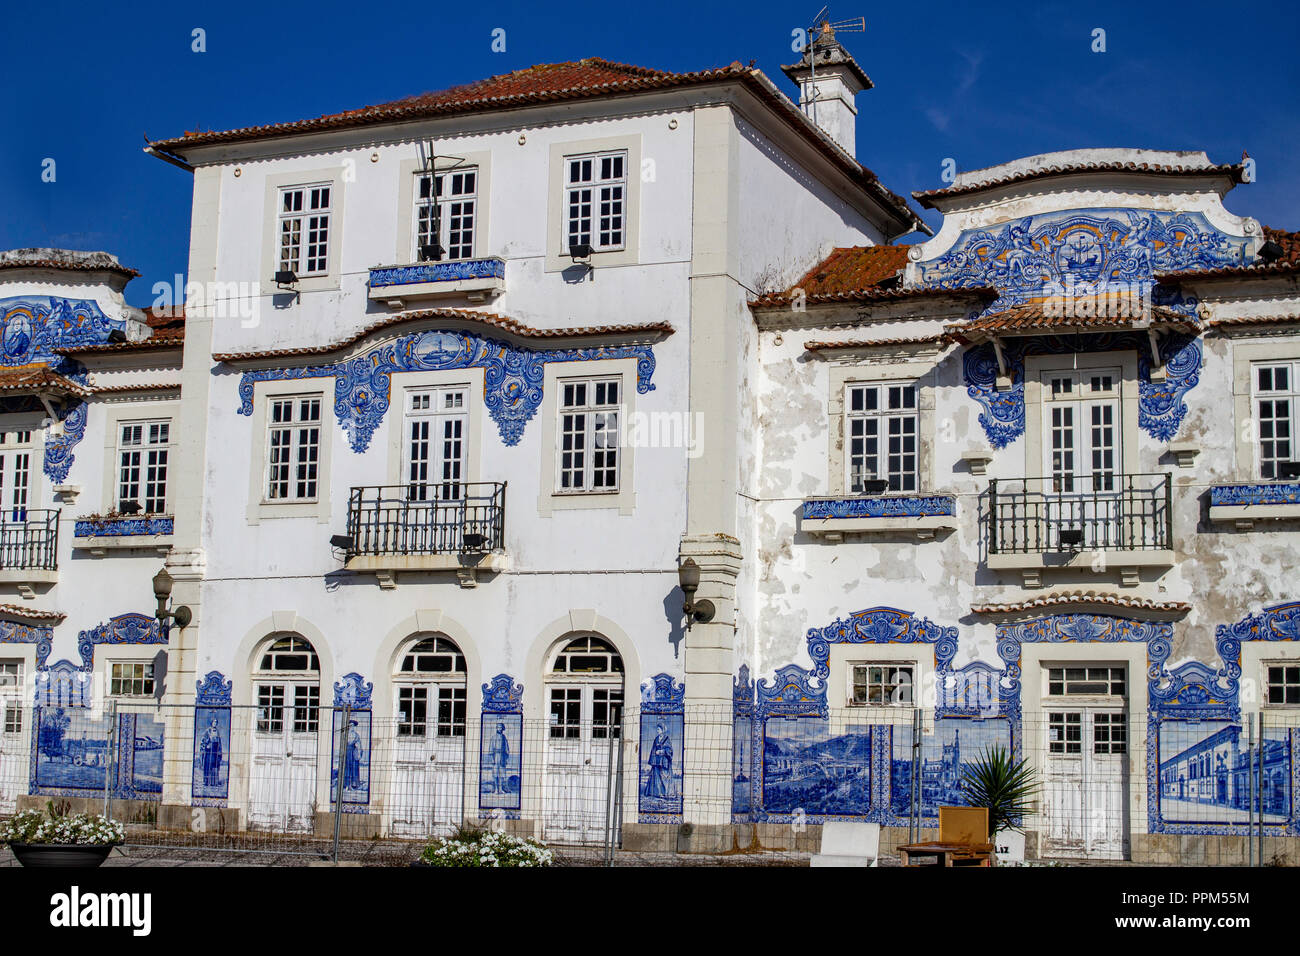 Aveiro, Portugal. The old train station in Aveiro ,decorated with  azulejo tiles depicting life in the city in the last century. Stock Photo